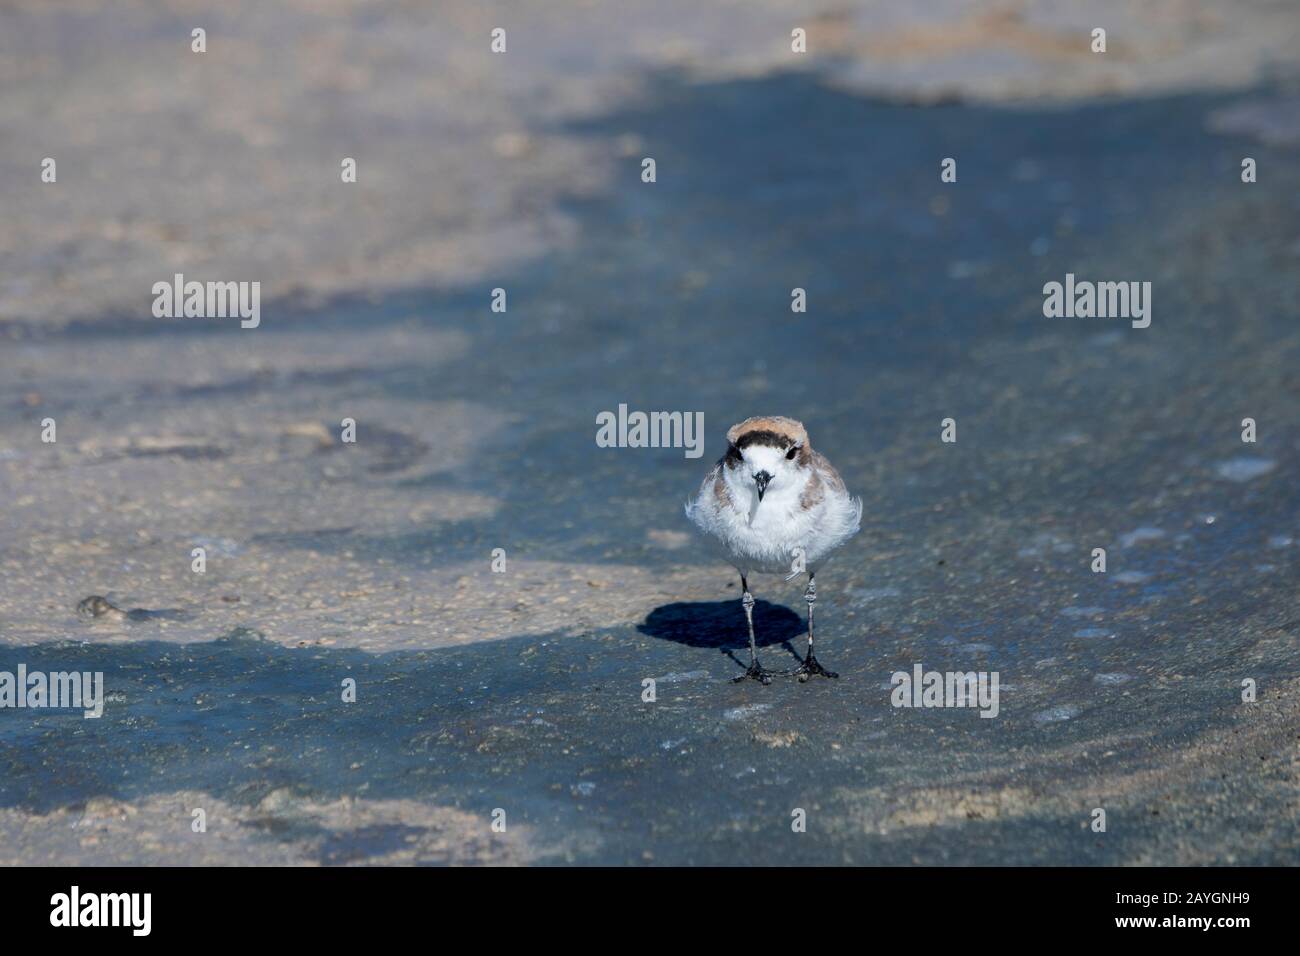 A puna plover (Charadrius alticola) is searching for food in the shallow waters of the Chaxa Lagoon, Soncor section of Los Flamencos National Reserve Stock Photo